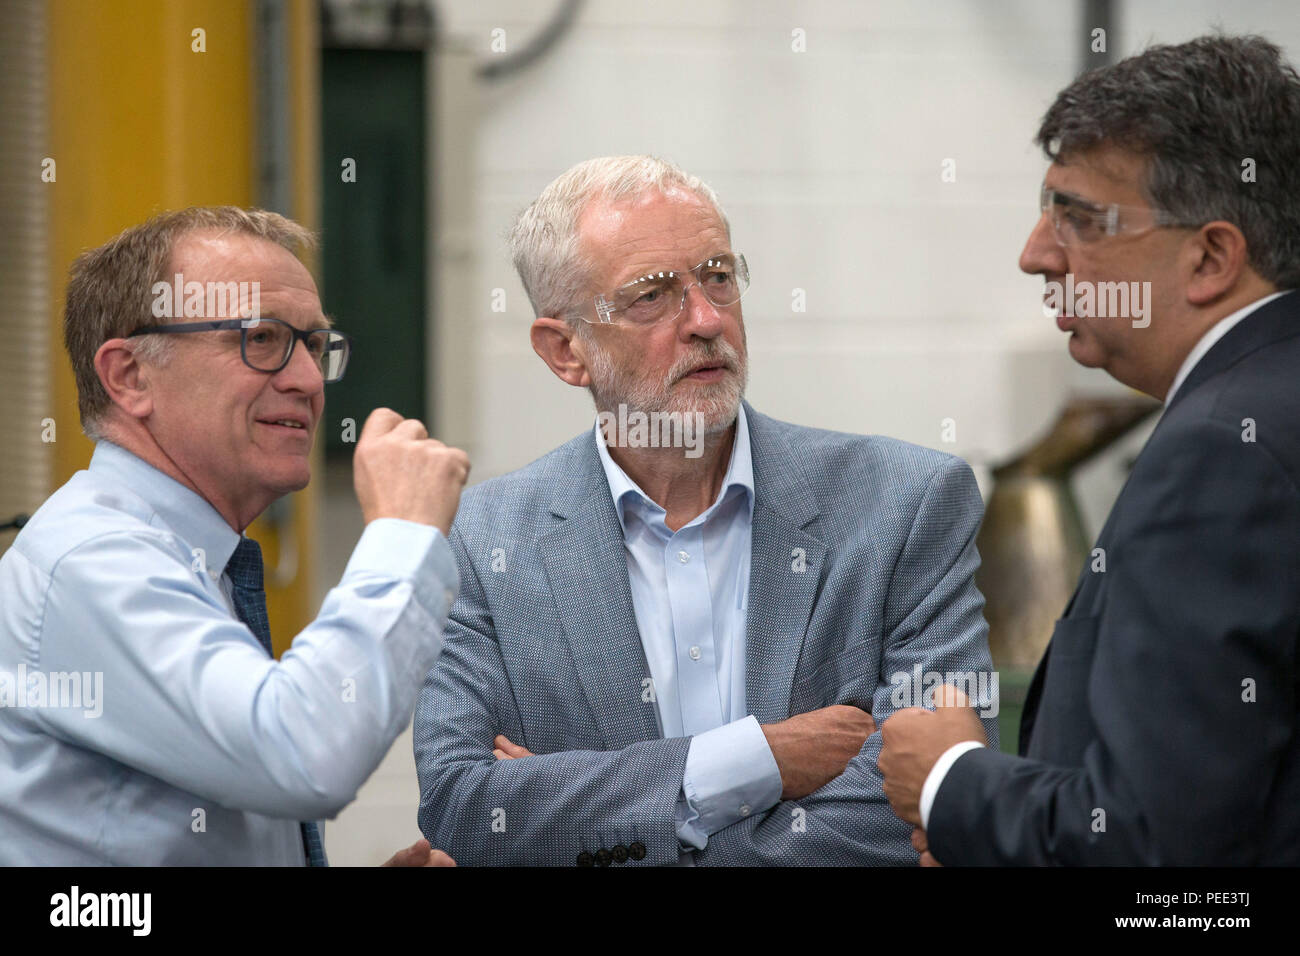 Labour leader Jeremy Corbyn during his visit to DePe Gear CO LTD, Stoke-on-Trent. Corbyn came under attack from Israeli Prime Minister Benjamin Netanyahu on Monday after it emerged that he attended a ceremony where a wreath was was laid in memory of Palestinians suspected of being behind the Munich Olympics massacre. Stock Photo